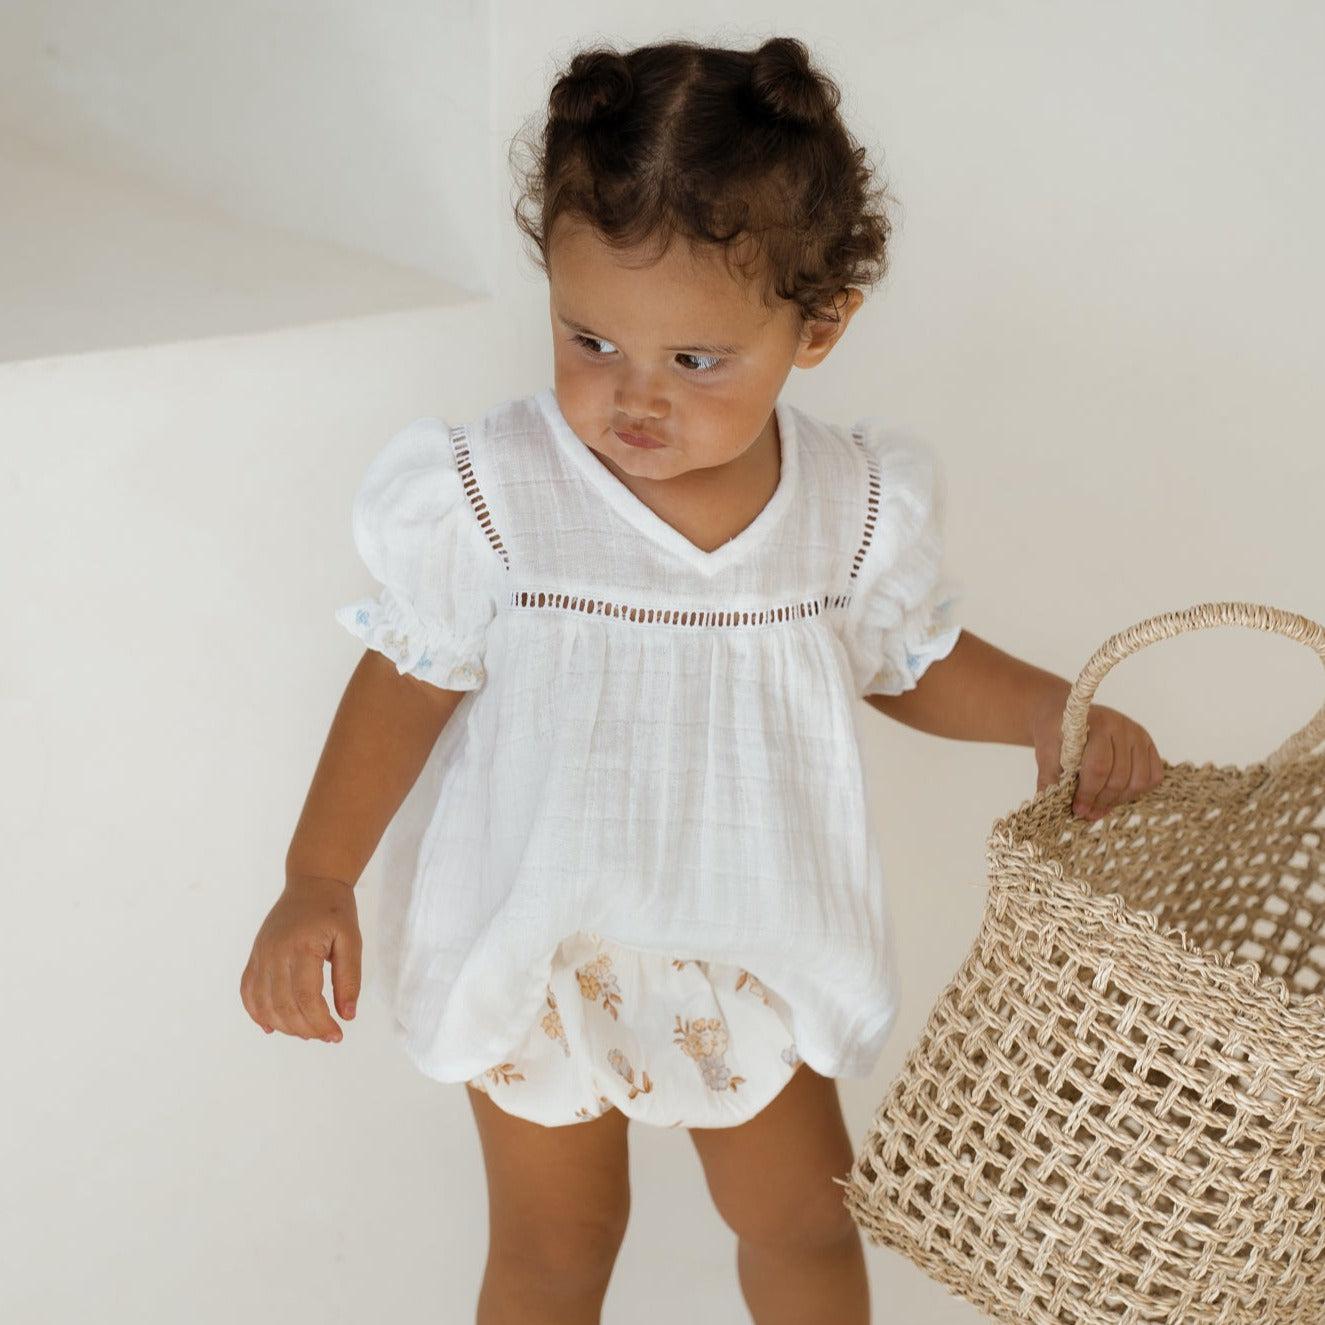 A vintage-inspired little girl wearing the Illoura the Label clover blouse & bloomer set and holding a basket.